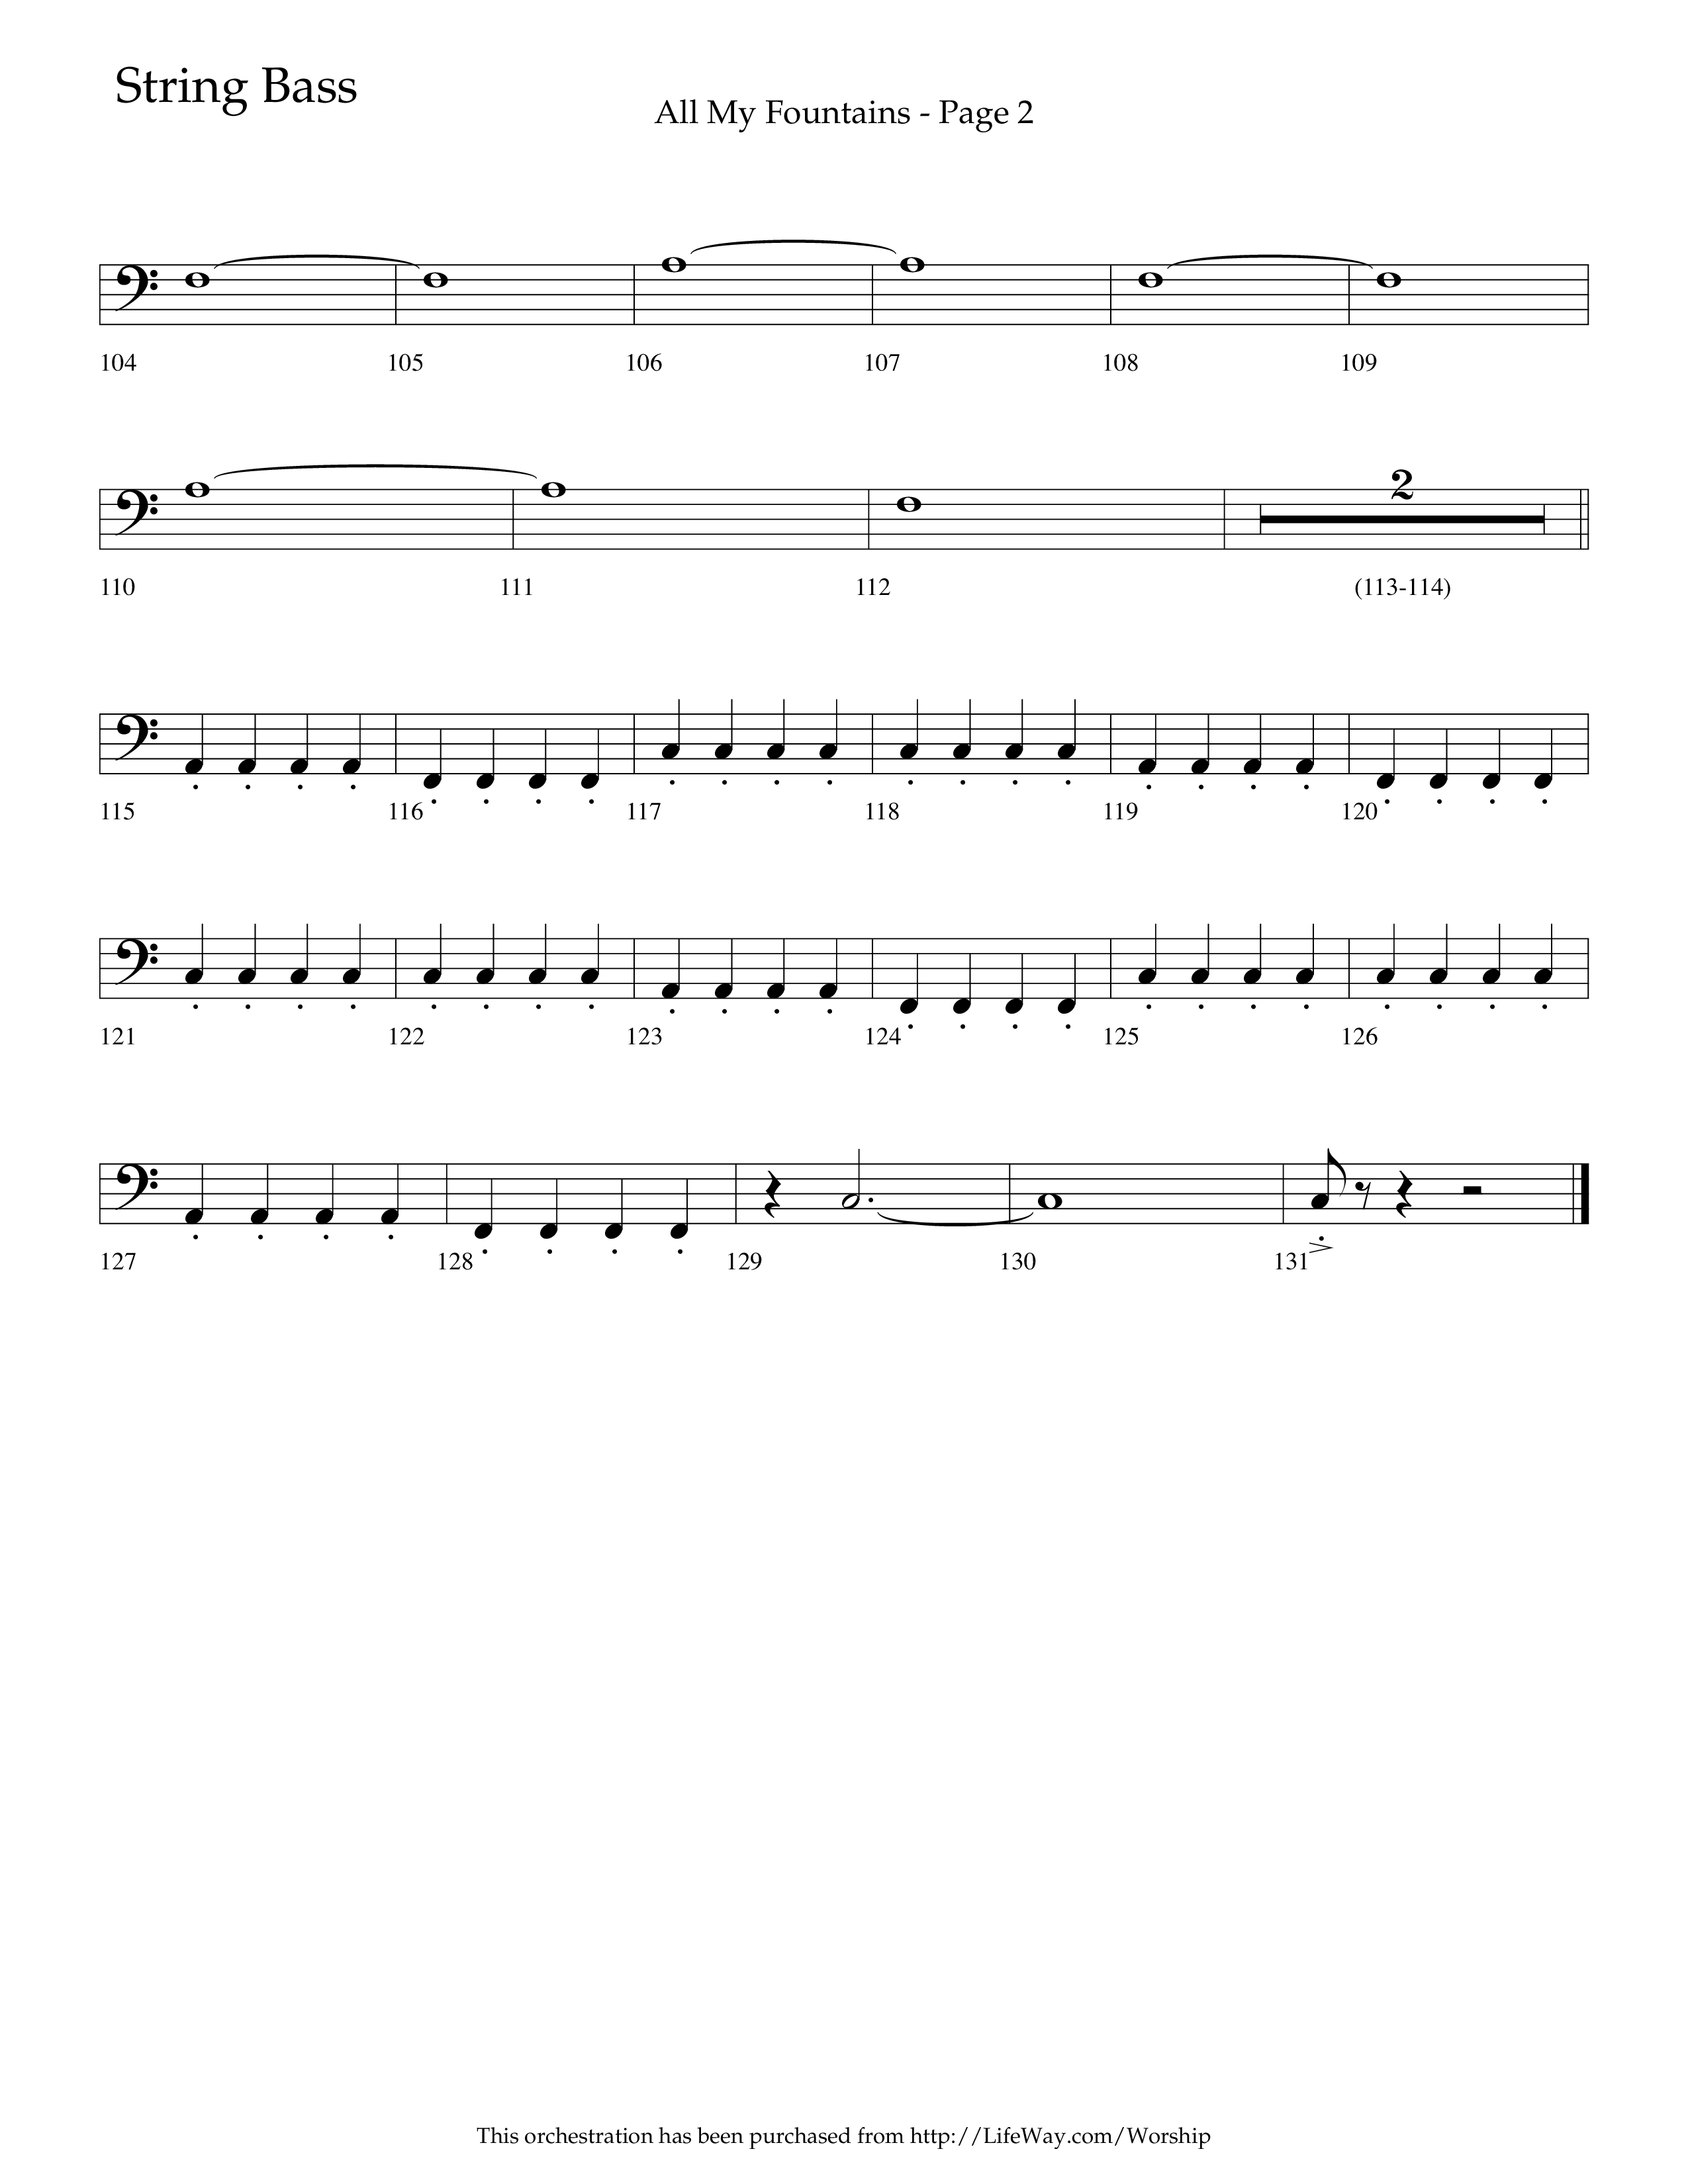 All My Fountains (Choral Anthem SATB) String Bass (Lifeway Choral / Arr. Russell Mauldin)